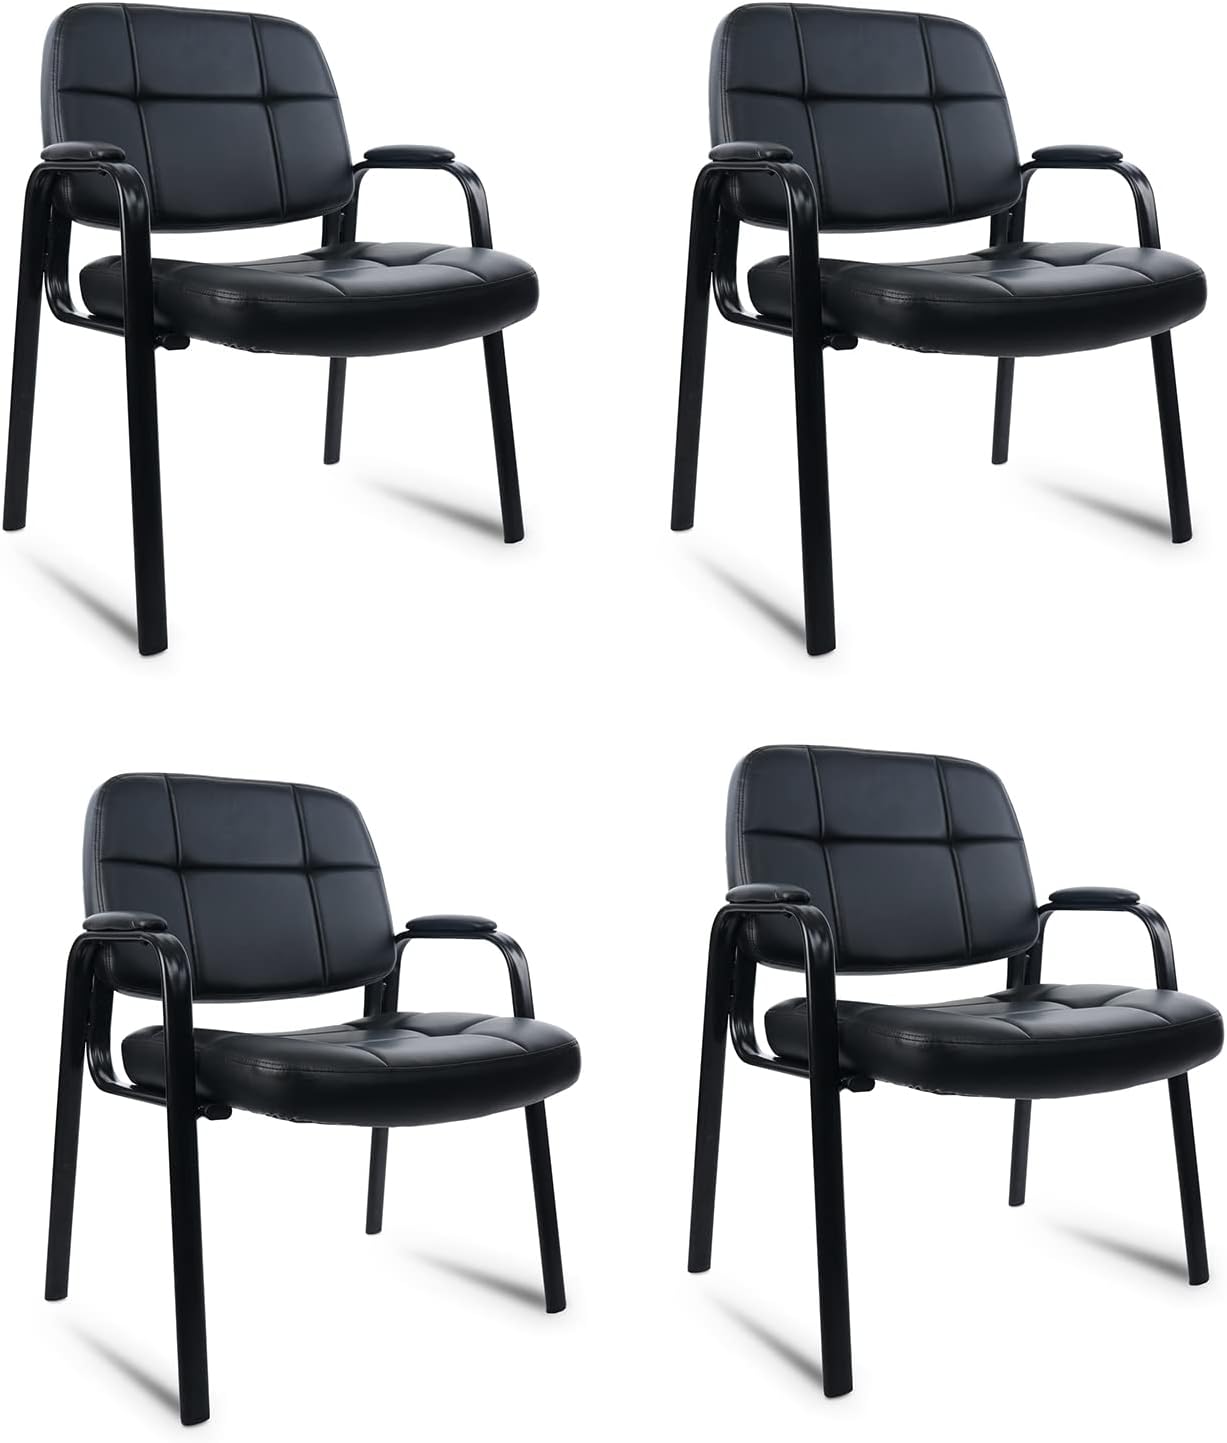 CLATINA Big & Tall 400lbs Waiting Room Guest Chair, Leather Office Reception Chair No Wheels with Padded Arms for Elderly Home Desk Conference Room Lobby Side Salon Clinic, Black(4 Pack) - image 1 of 8